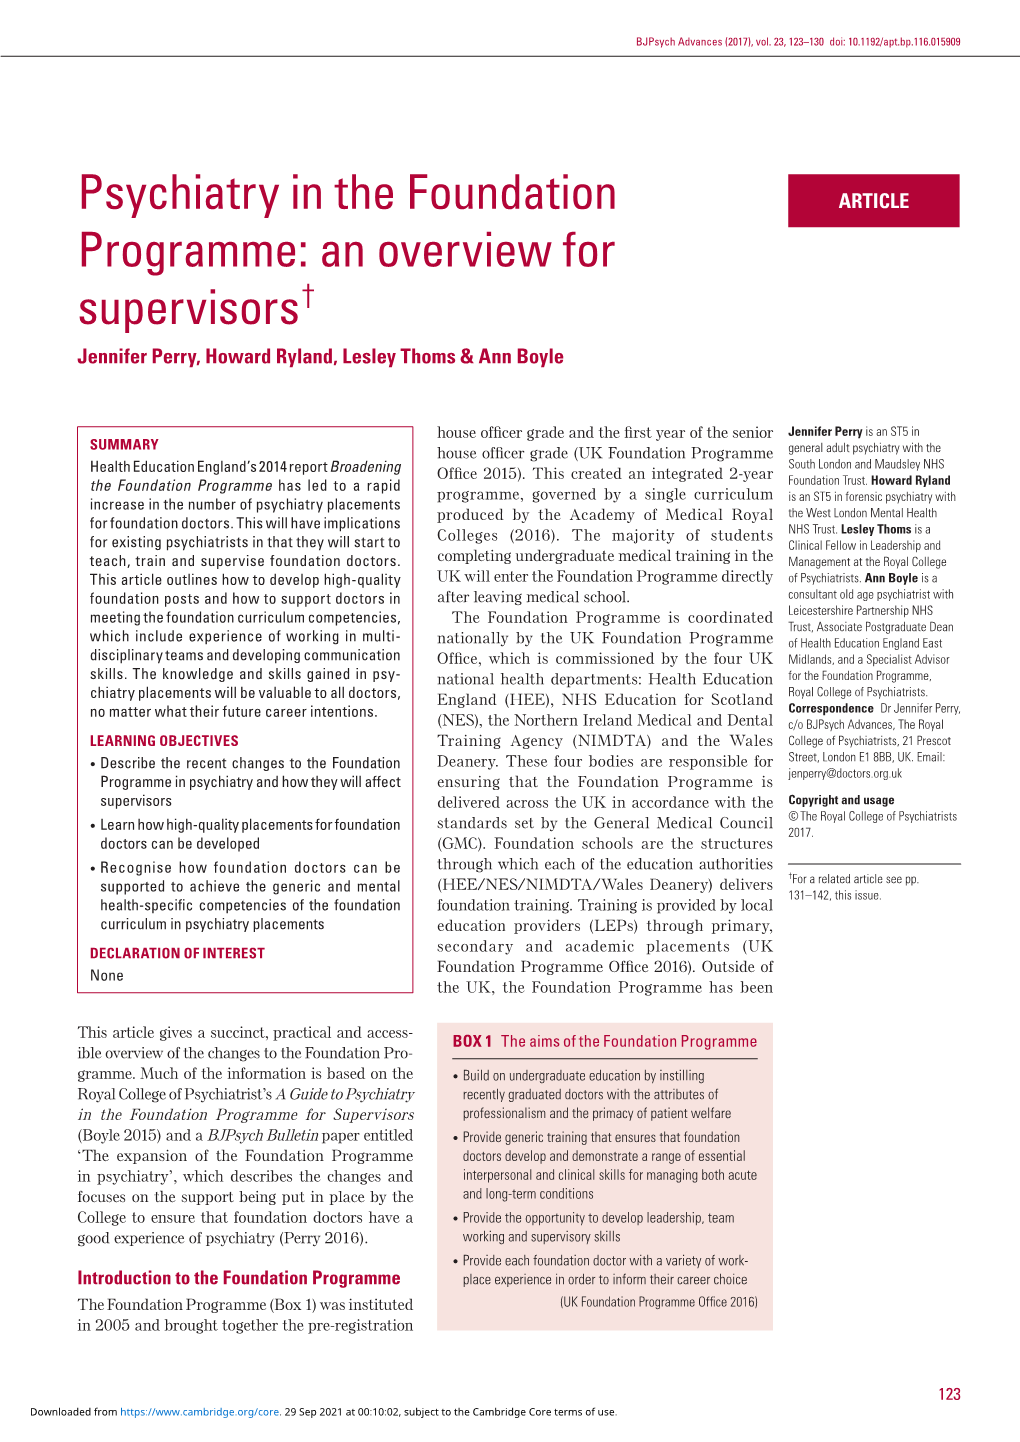 Psychiatry in the Foundation Programme: an Overview for Supervisors